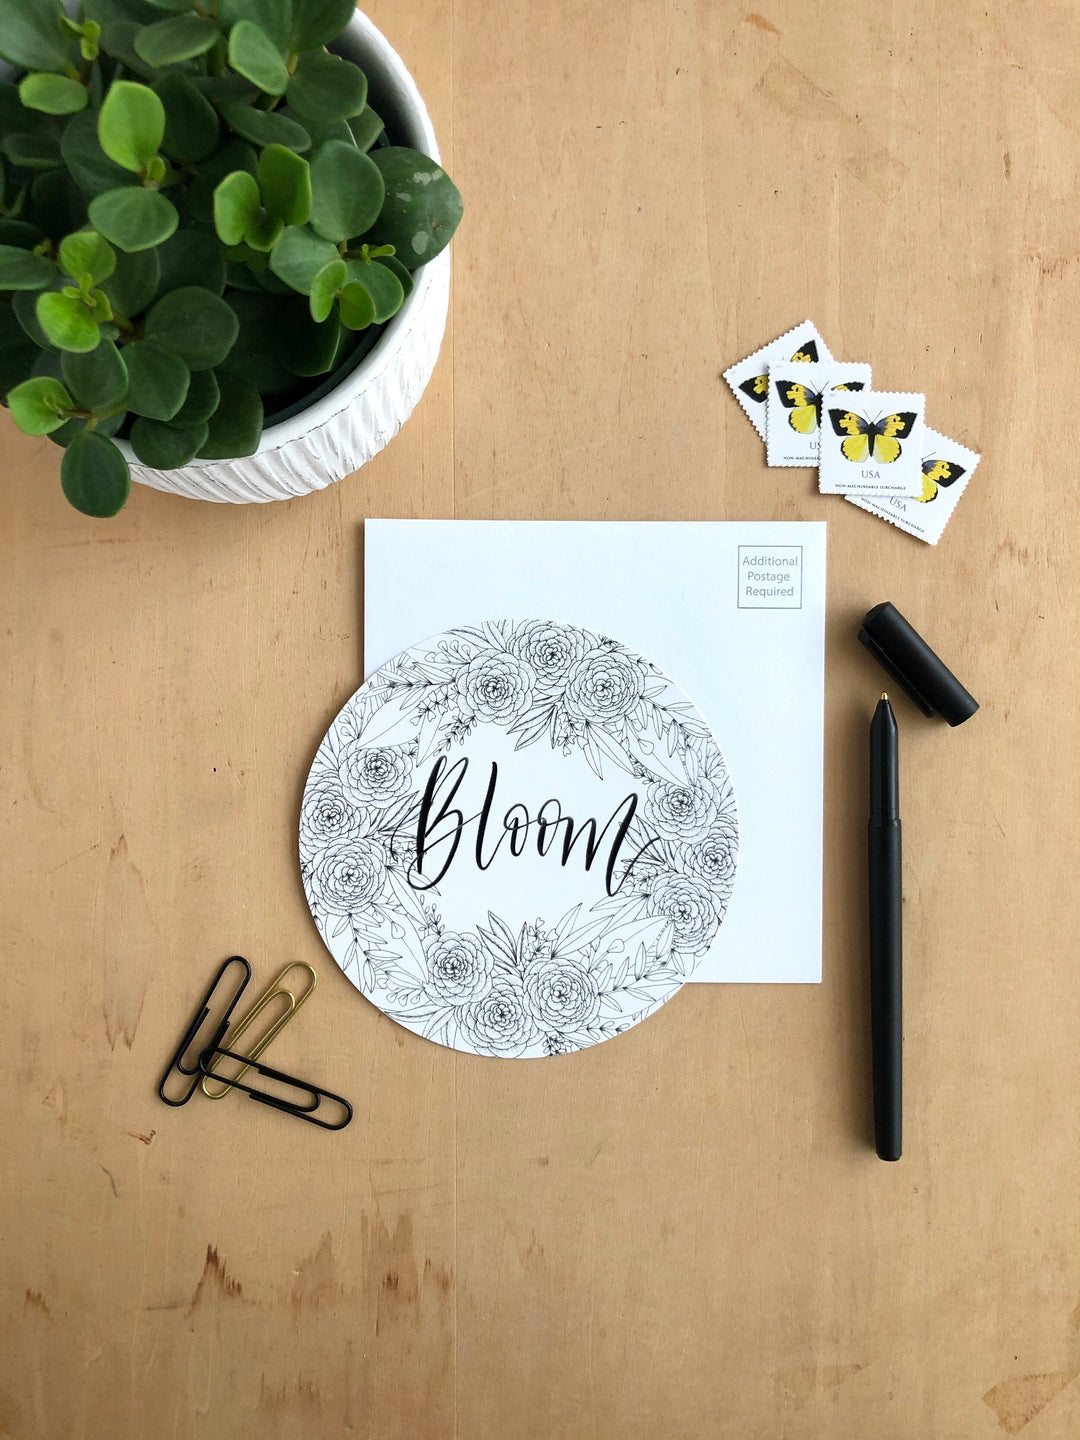 Black and White circular card Showcasing illustrations of flowers this floral greeting card captures the essence of a blossoming floral symbolizing growth and the beauty found in relationships.